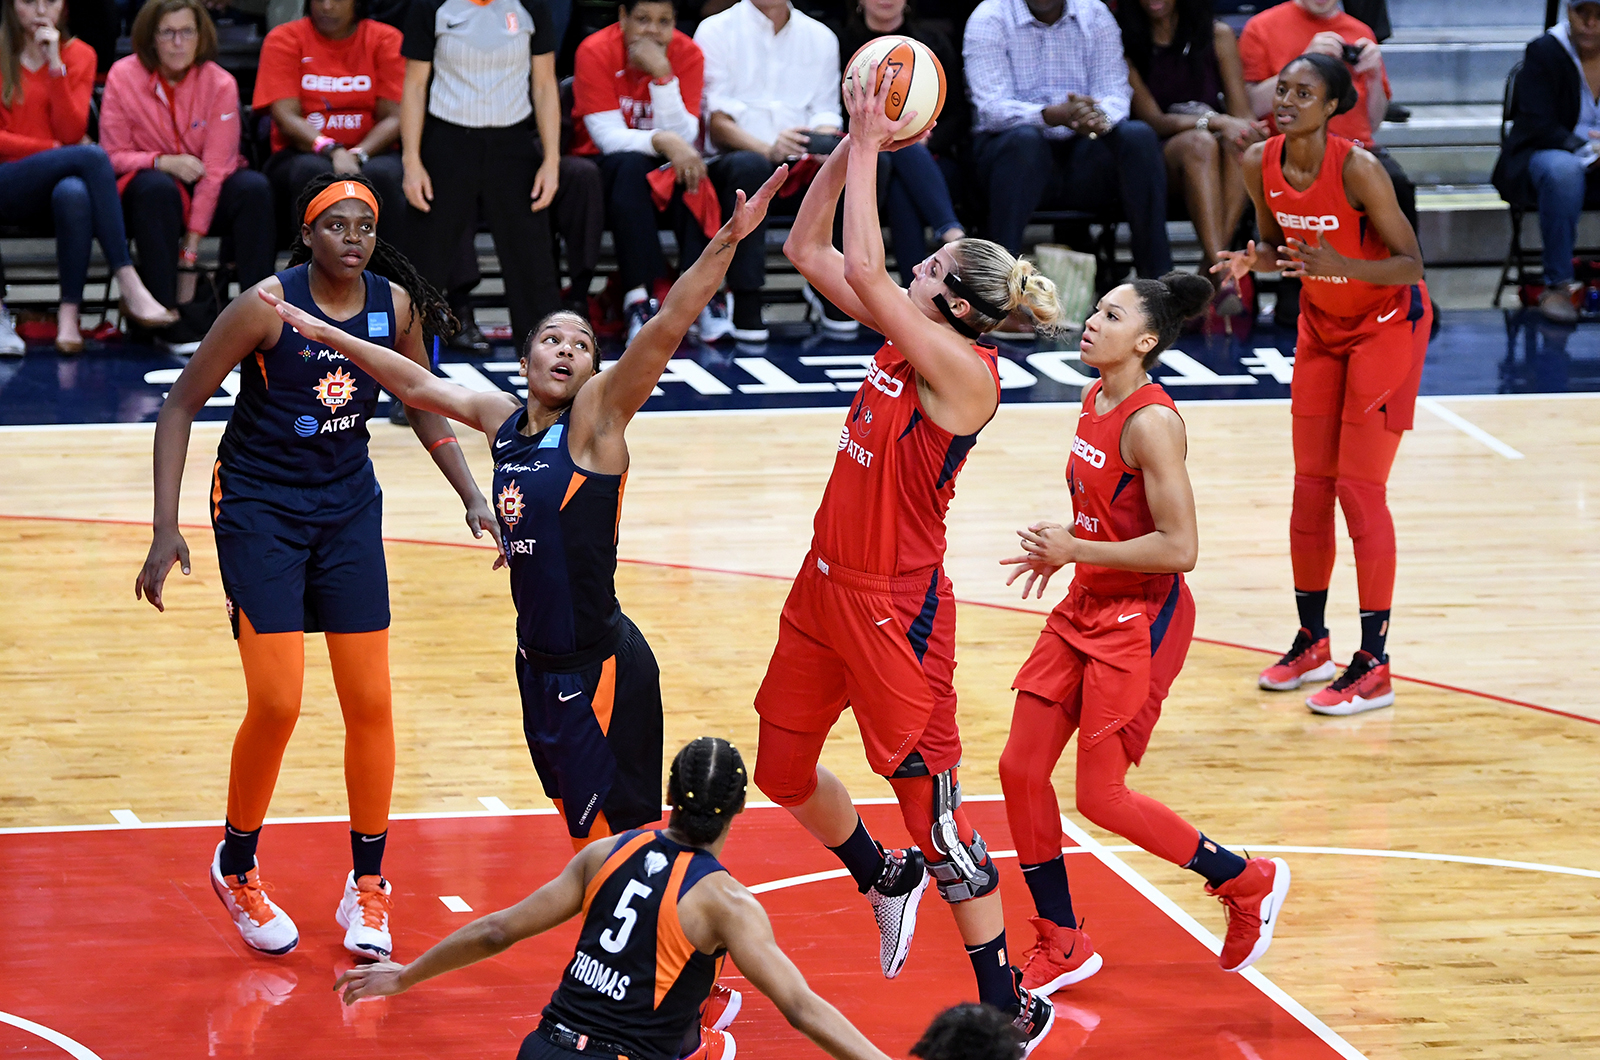 Elena Delle Donne #11 of the Washington Mystics shoots the ball against Alyssa Thomas #25 of the Connecticut Sun in Game 5 of the 2019 WNBA Finals at St. Elizabeths East Entertainment & Sports Arena in Washington, on October 10, 2019.